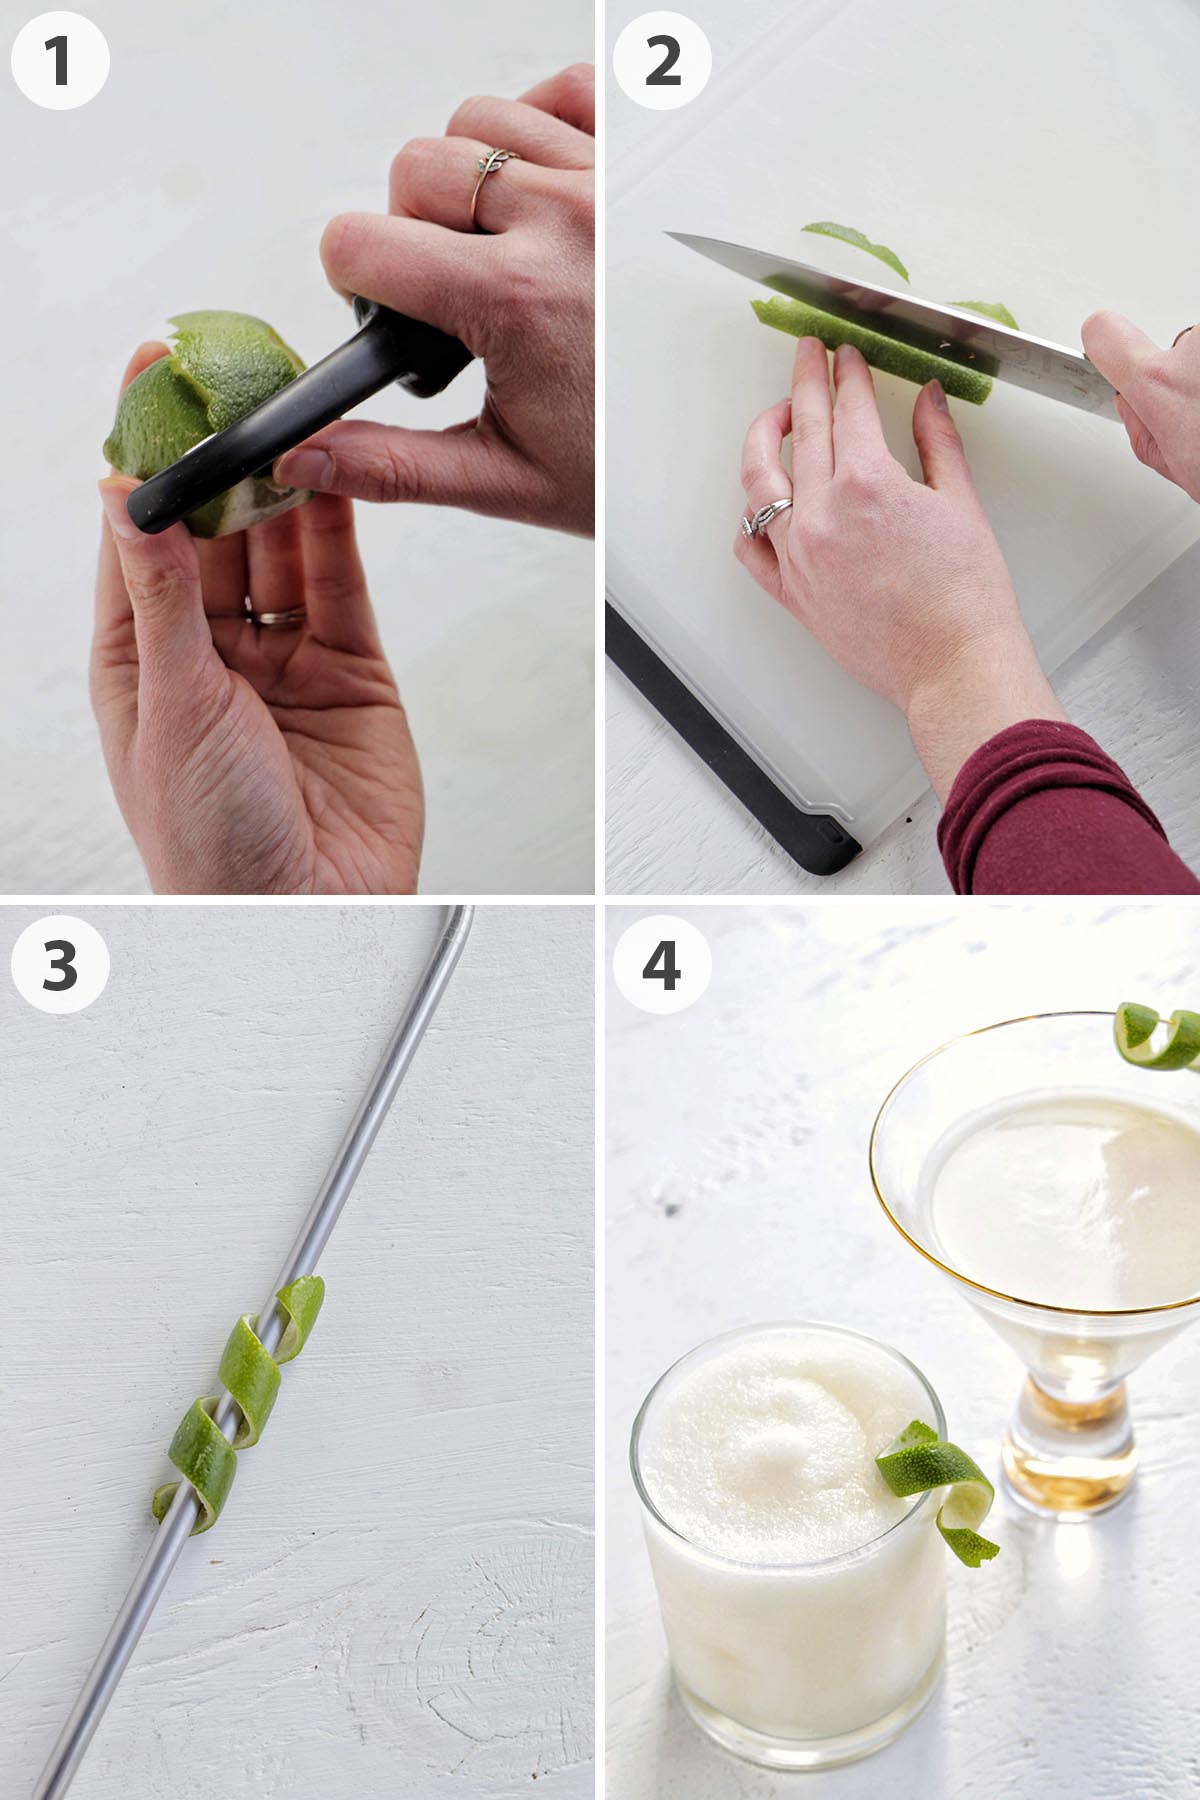 four numbered photos showing how to make a twisted lime garnish.